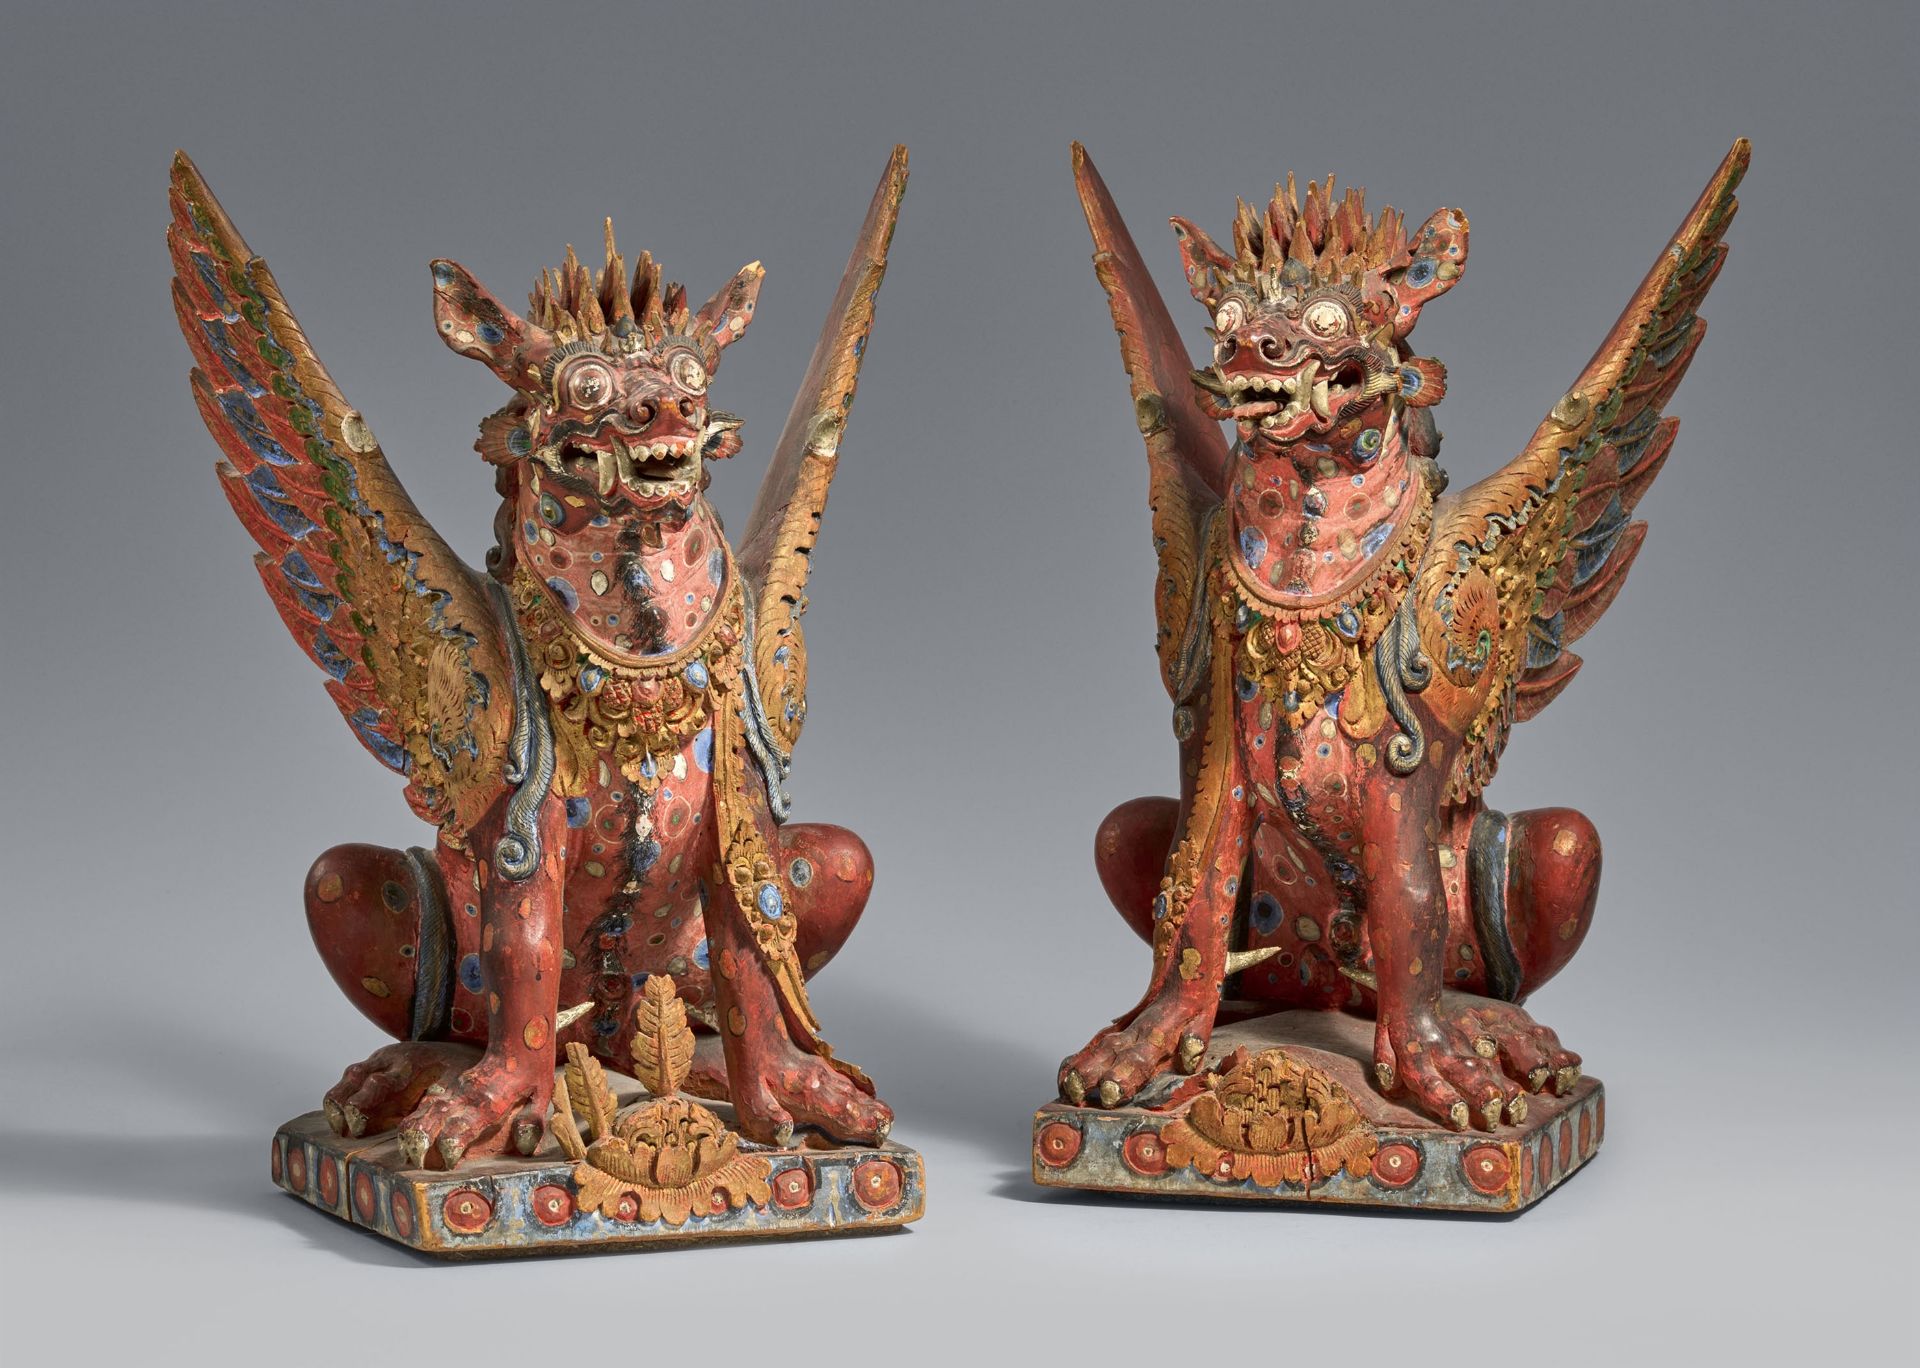 Two Bali polychromed wood figures of winged lions (singha). Indonesia. 20th century